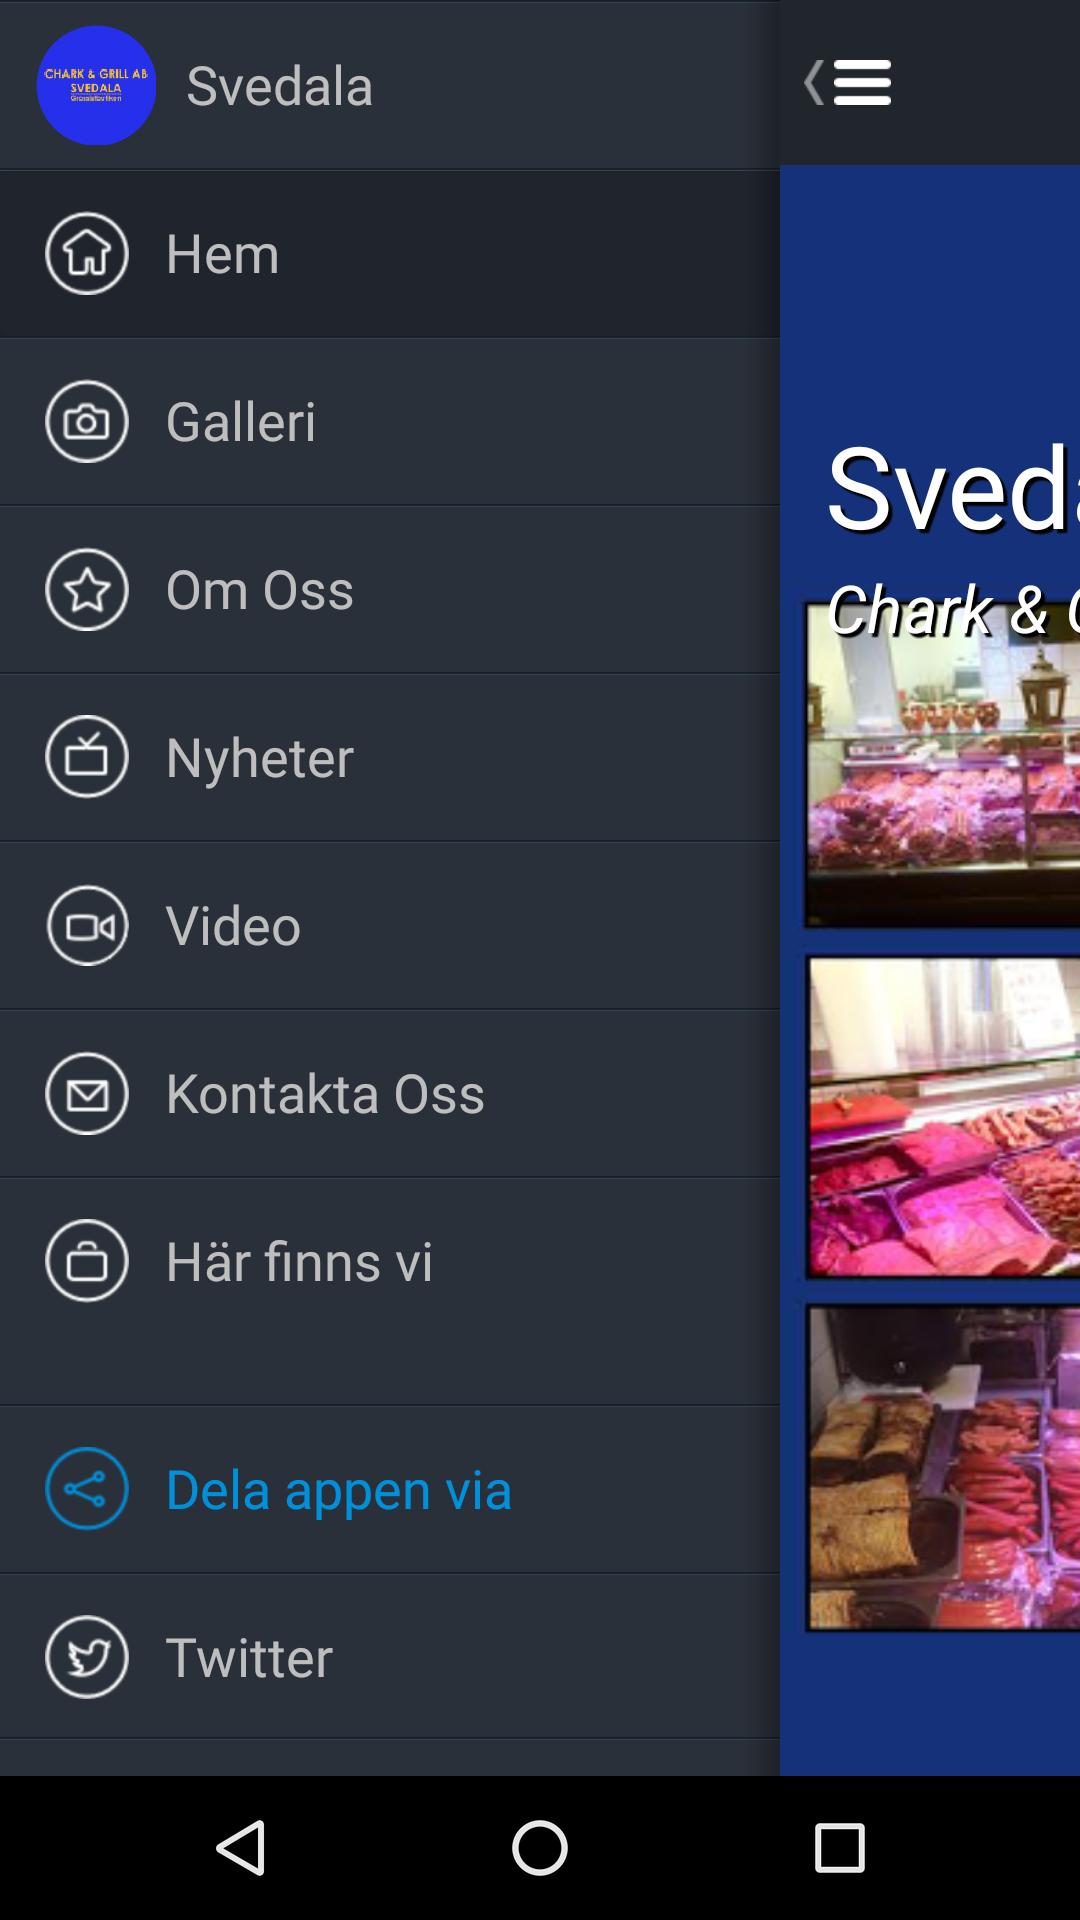 Svedala Chark & Grill for Android - APK Download